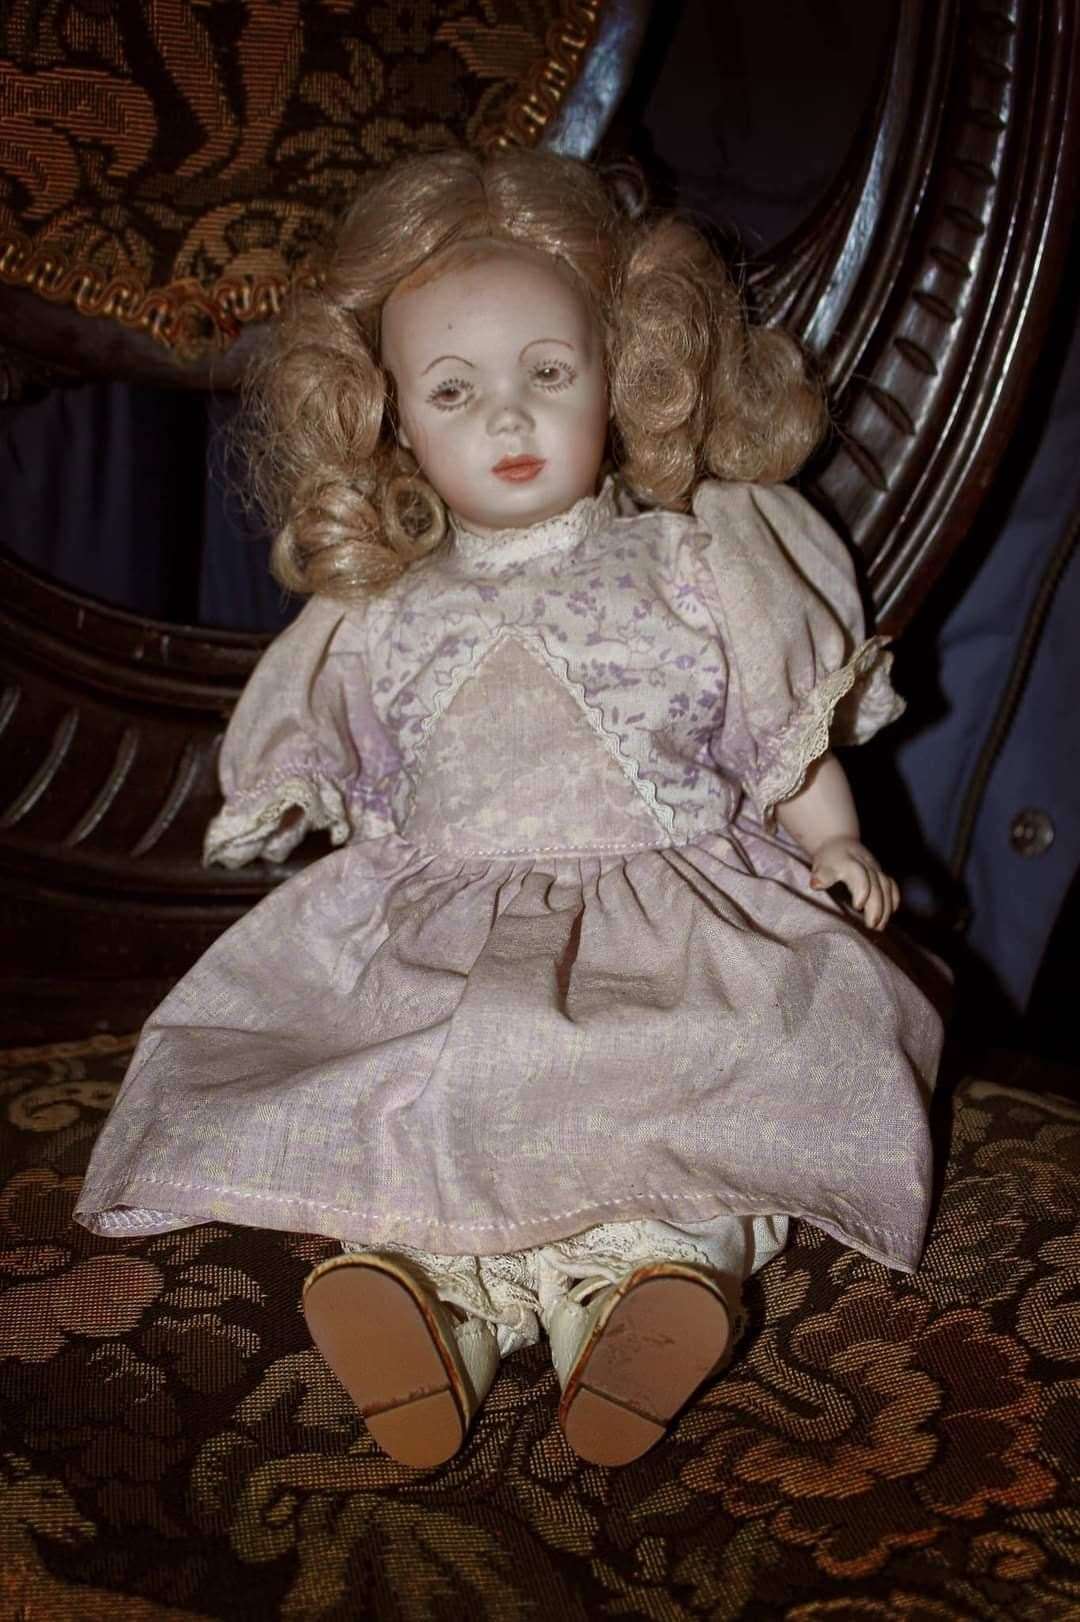 The spooky doll has returned to the Highlands after scaring a family in New Zealand.